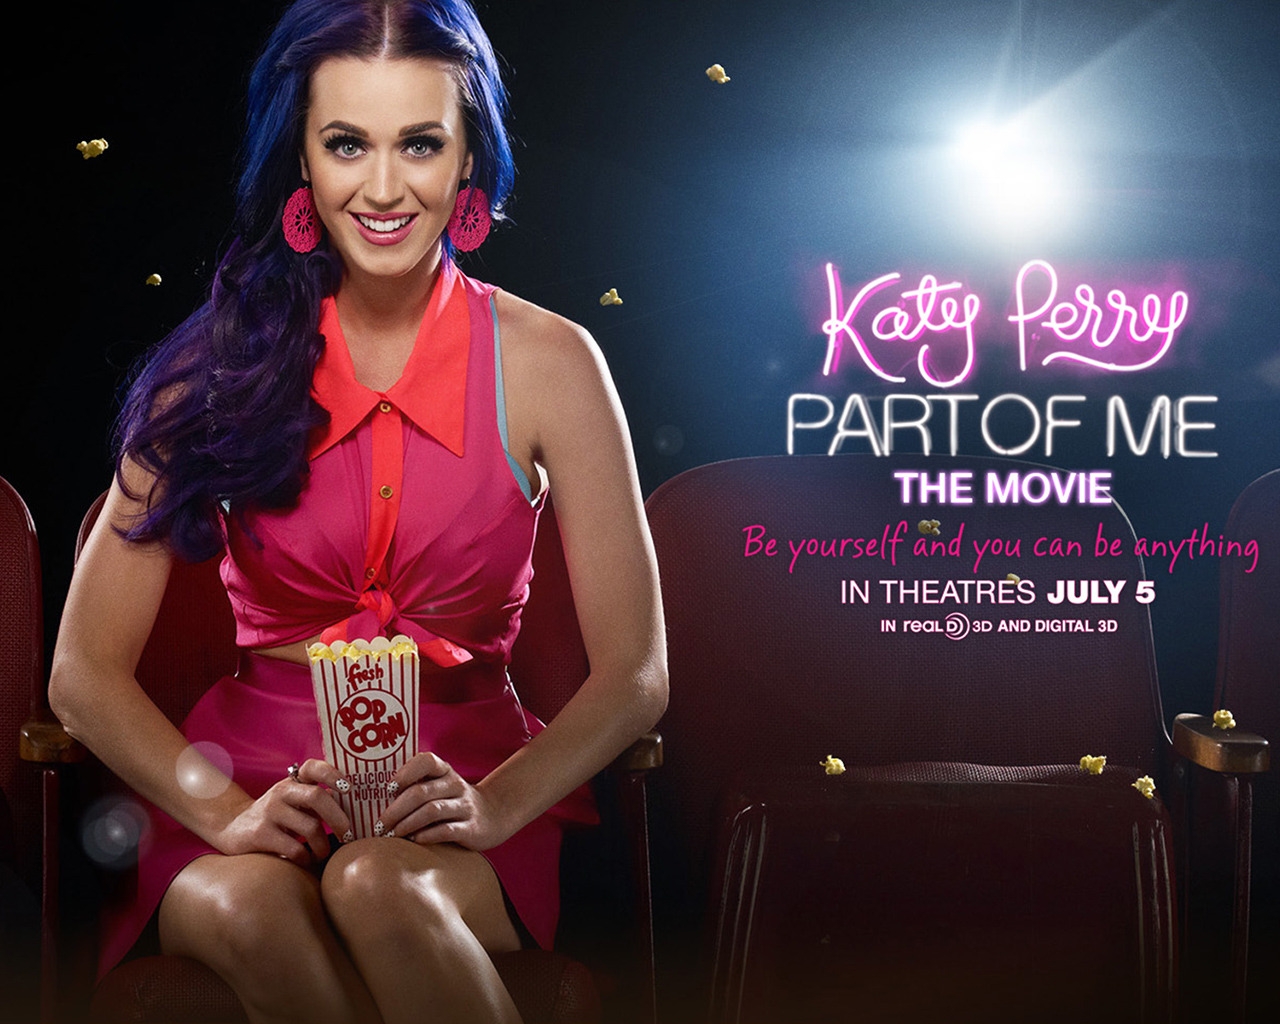 Katy Perry Part Of Me Movie 2012 for 1280 x 1024 resolution